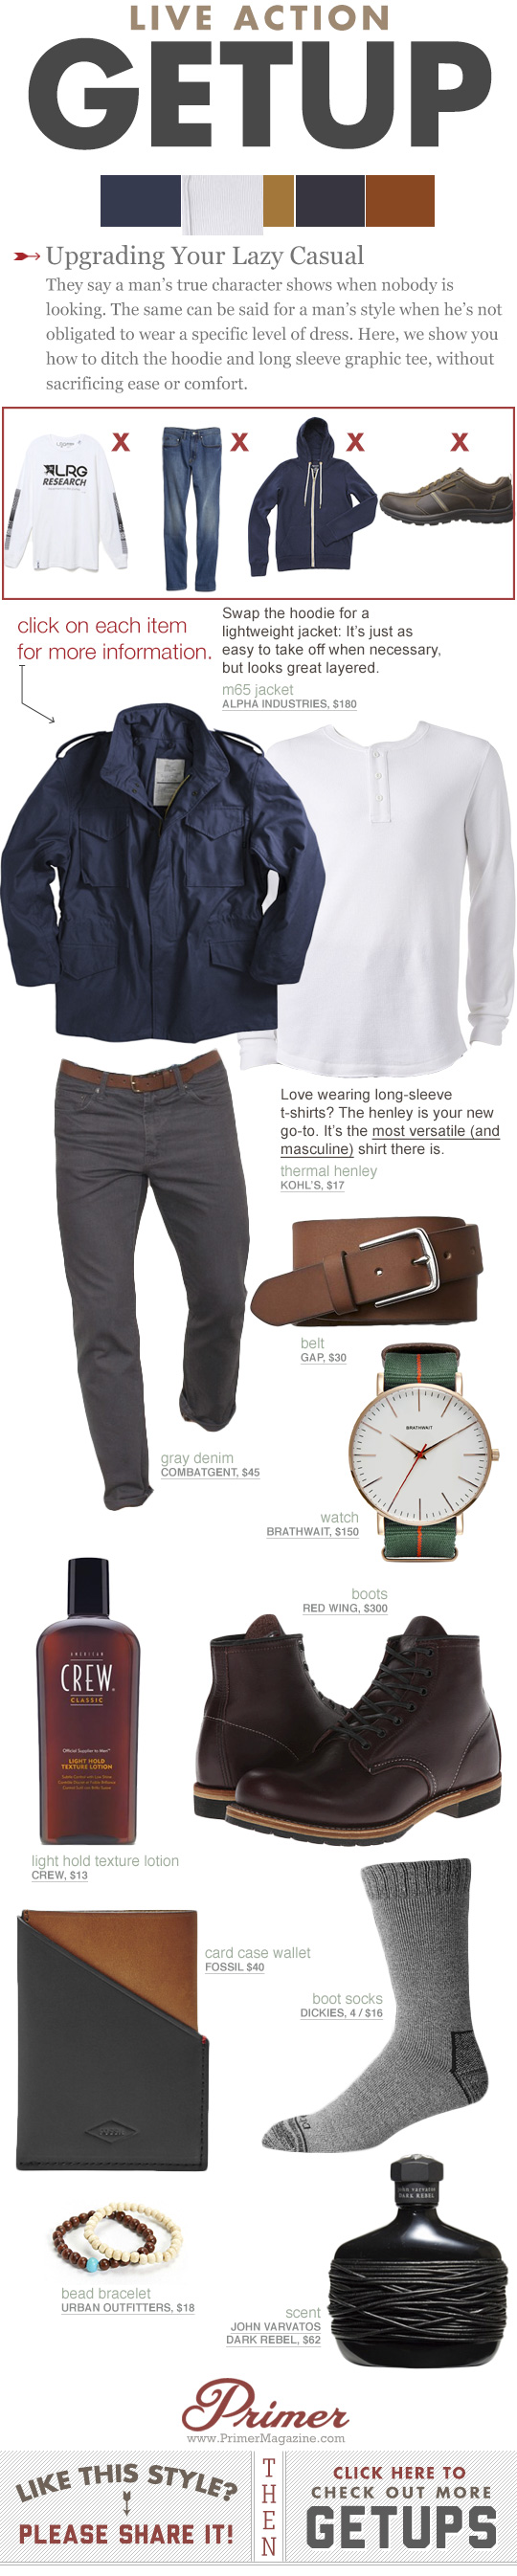 Getup - Upgrading Lazy Casual - with Blue military jacket, henley, and gray jeans